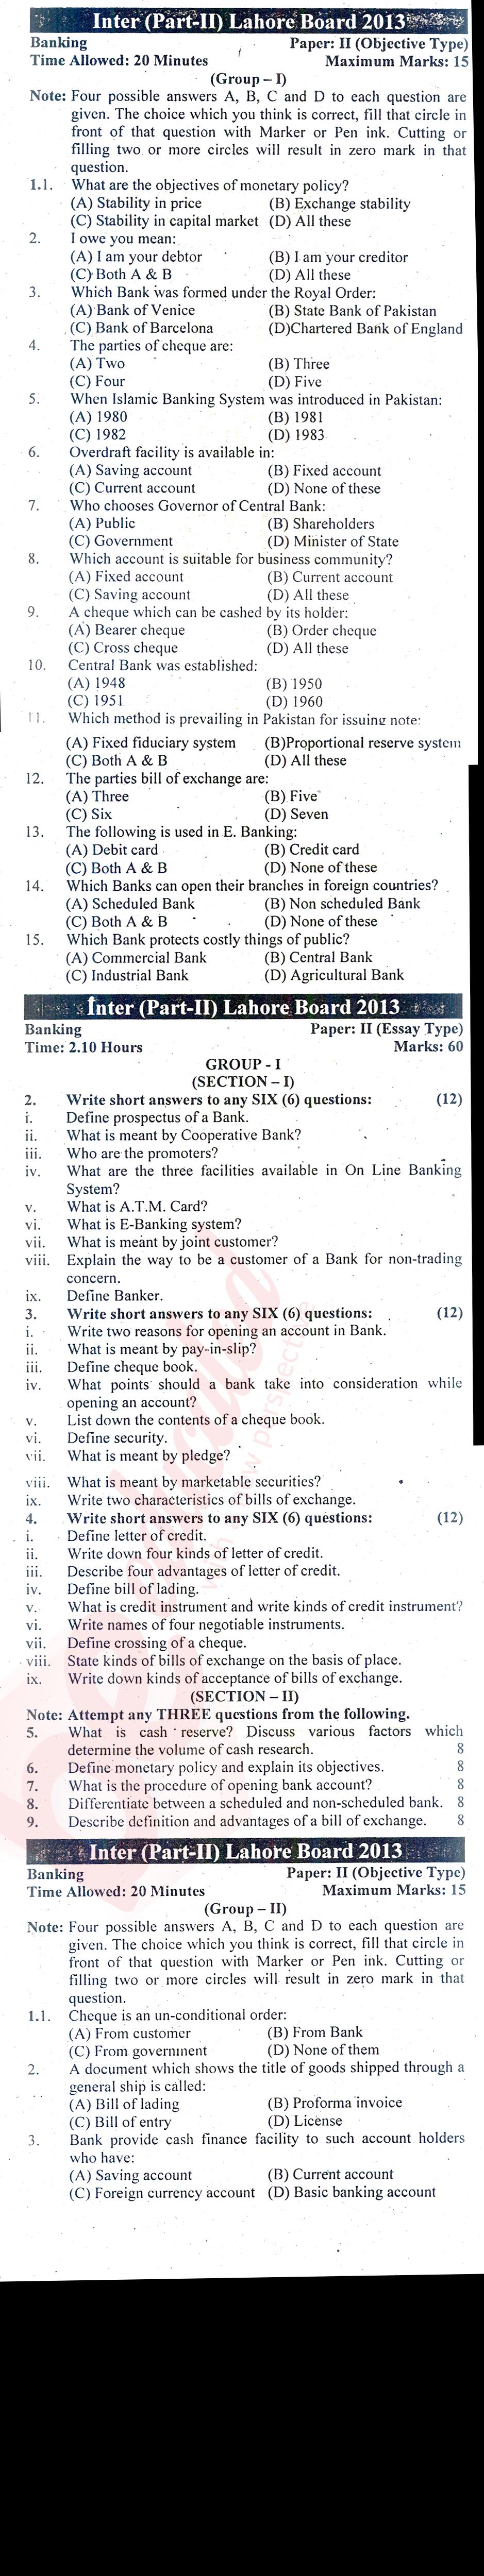 Principles of Banking ICOM Part 2 Past Paper Group 1 BISE Lahore 2013